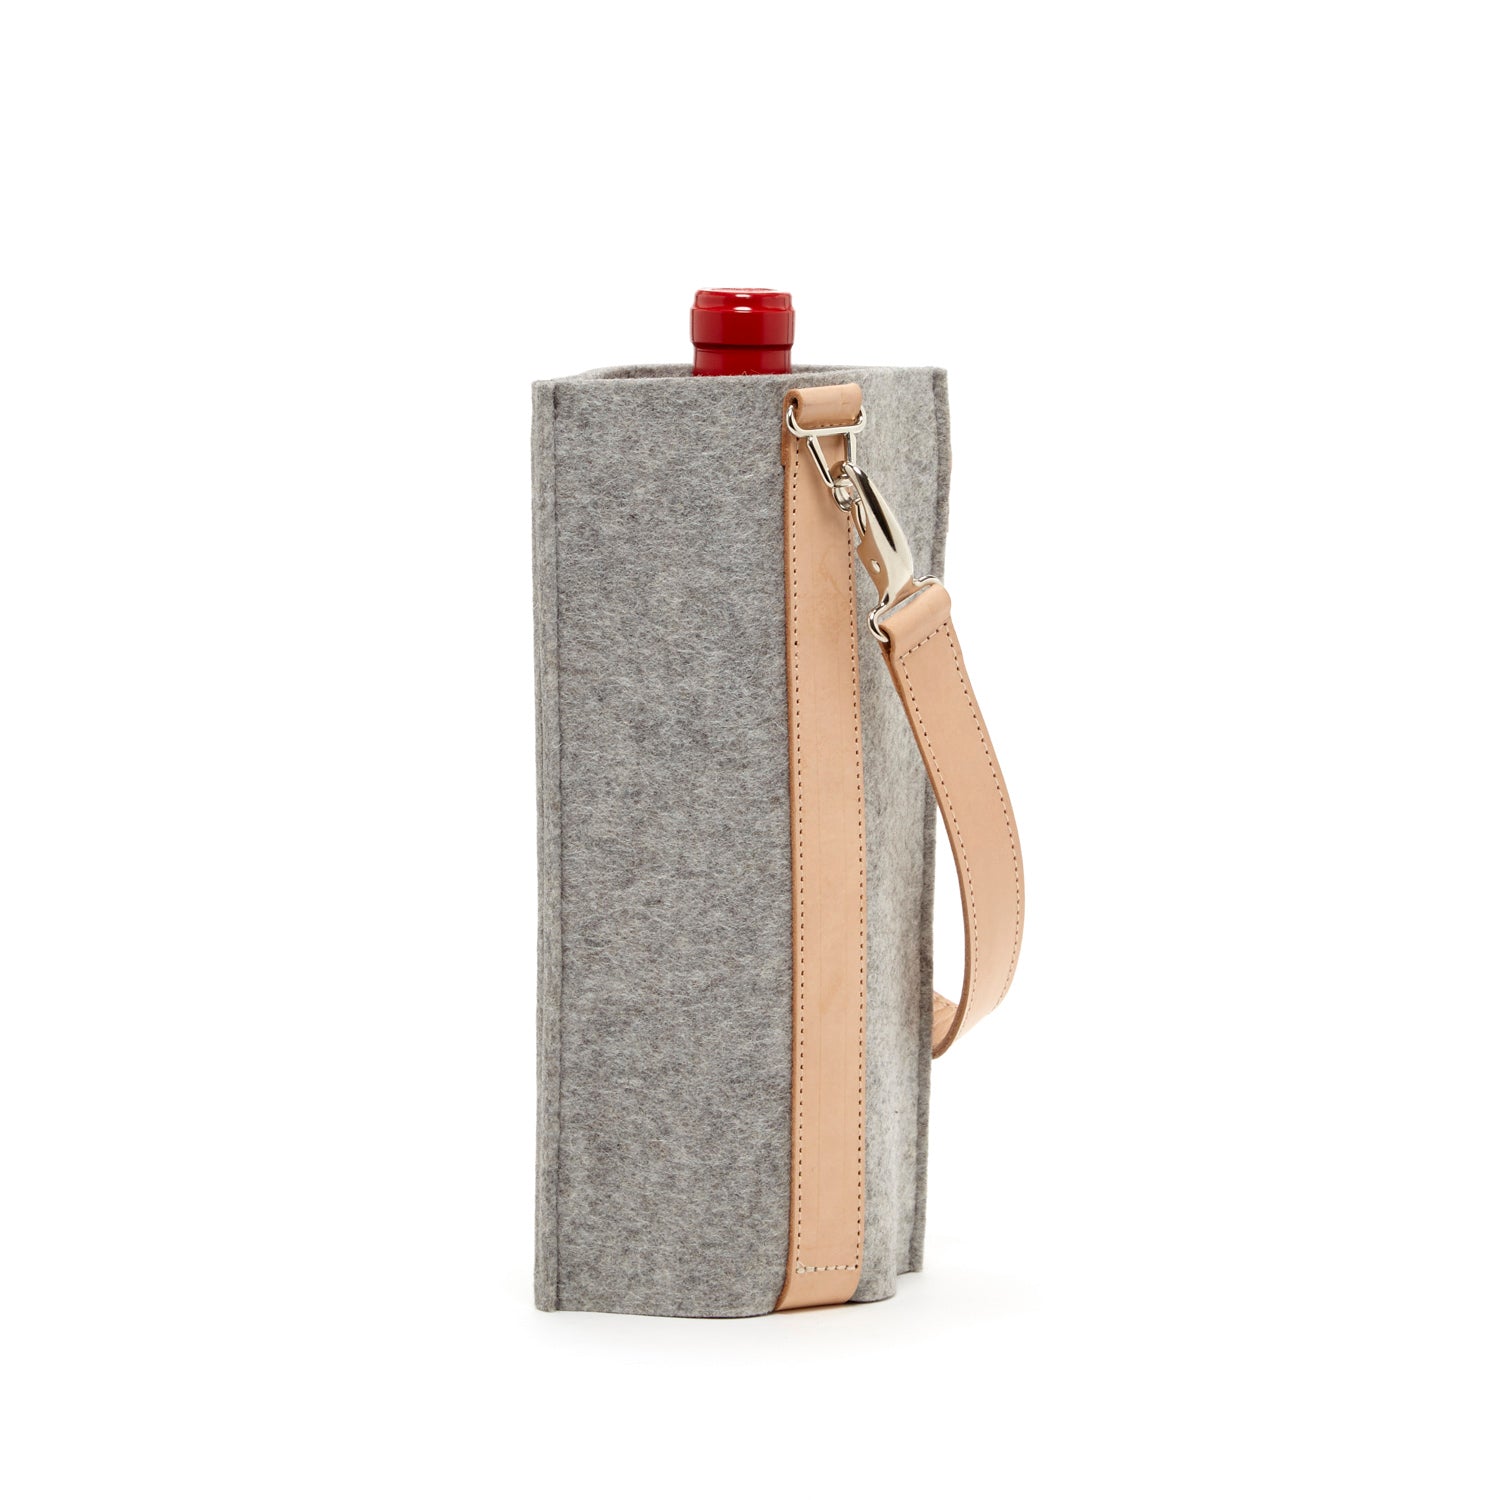 Solo Wine Carrier Gray Felt / Natural Leather